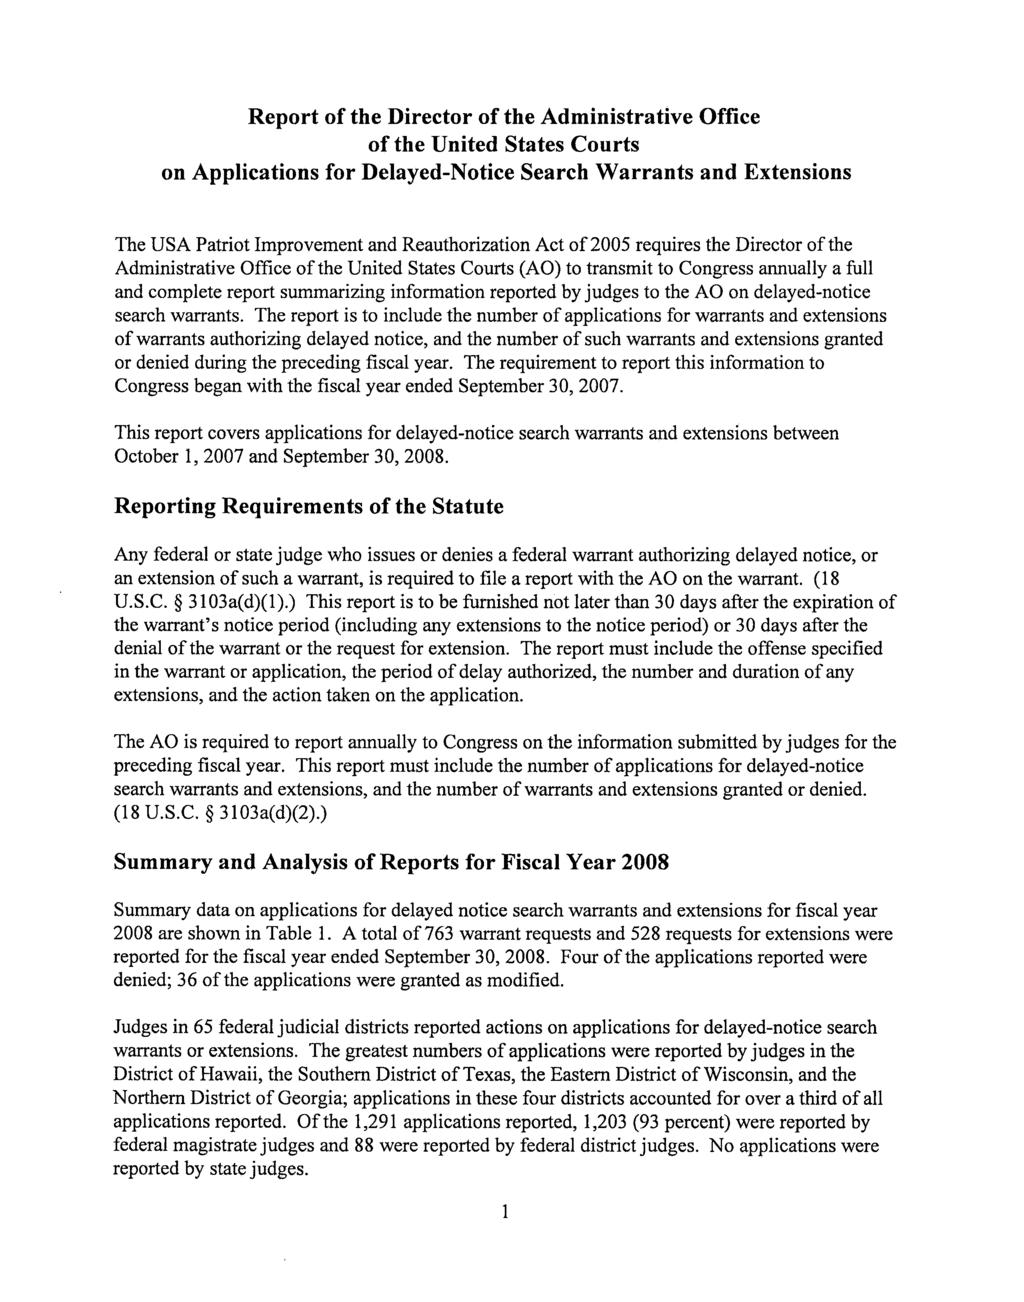 Report of the Director of the Administrative Office of the United States Courts on Applications for Delayed-Notice Search Warrants and Extensions The USA Patriot Improvement and Reauthorization Act